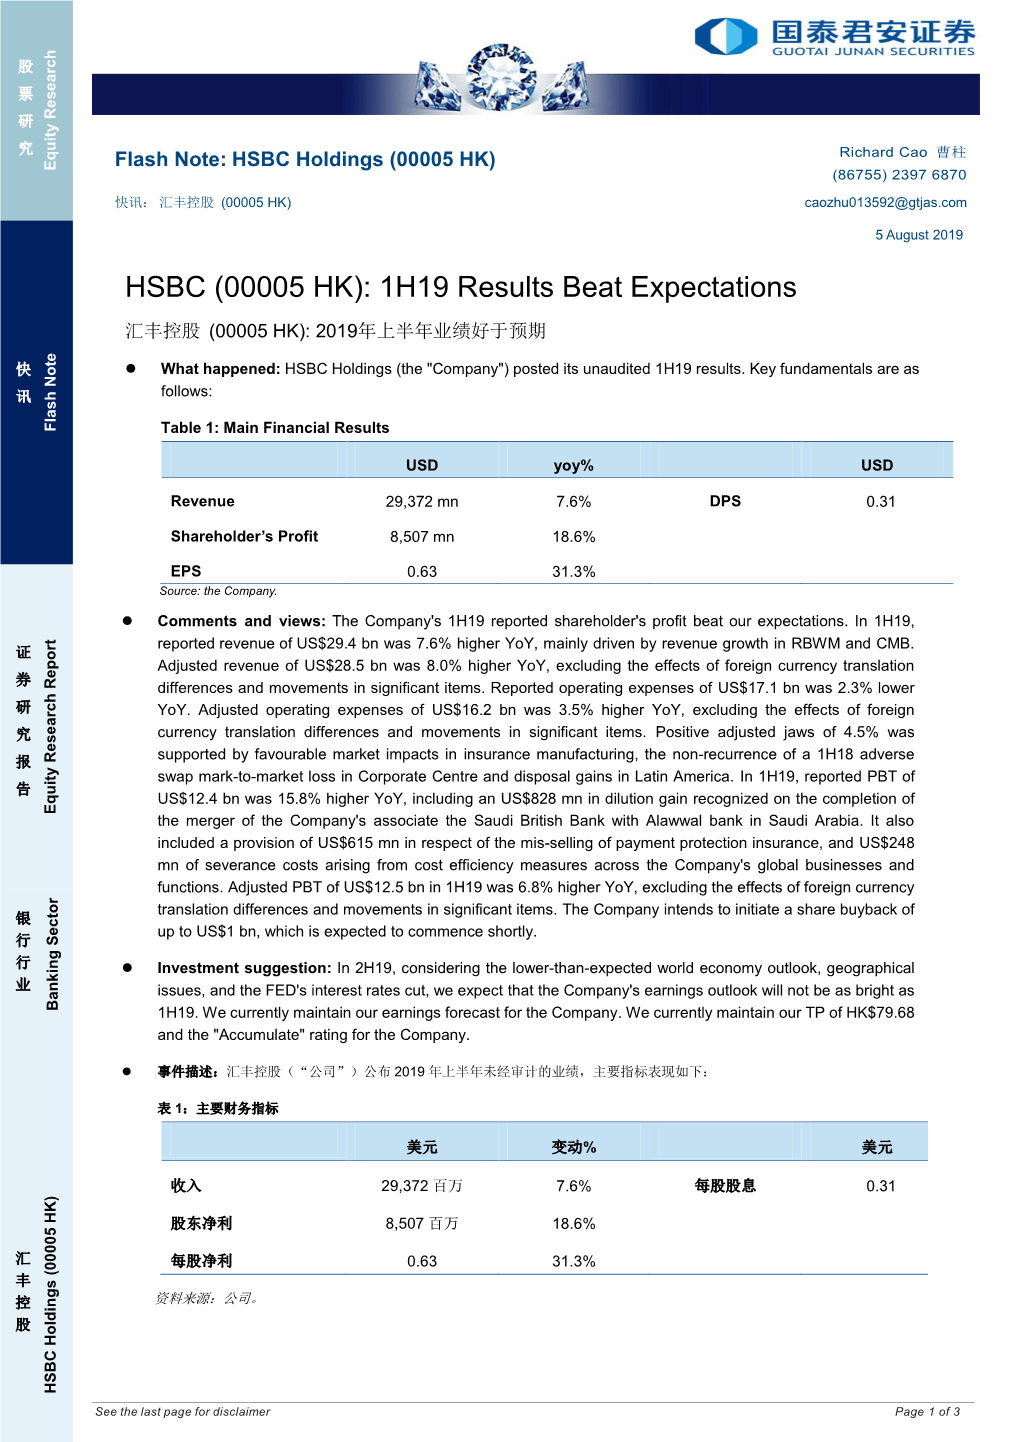 HSBC (00005 HK): 1H19 Results Beat Expectations